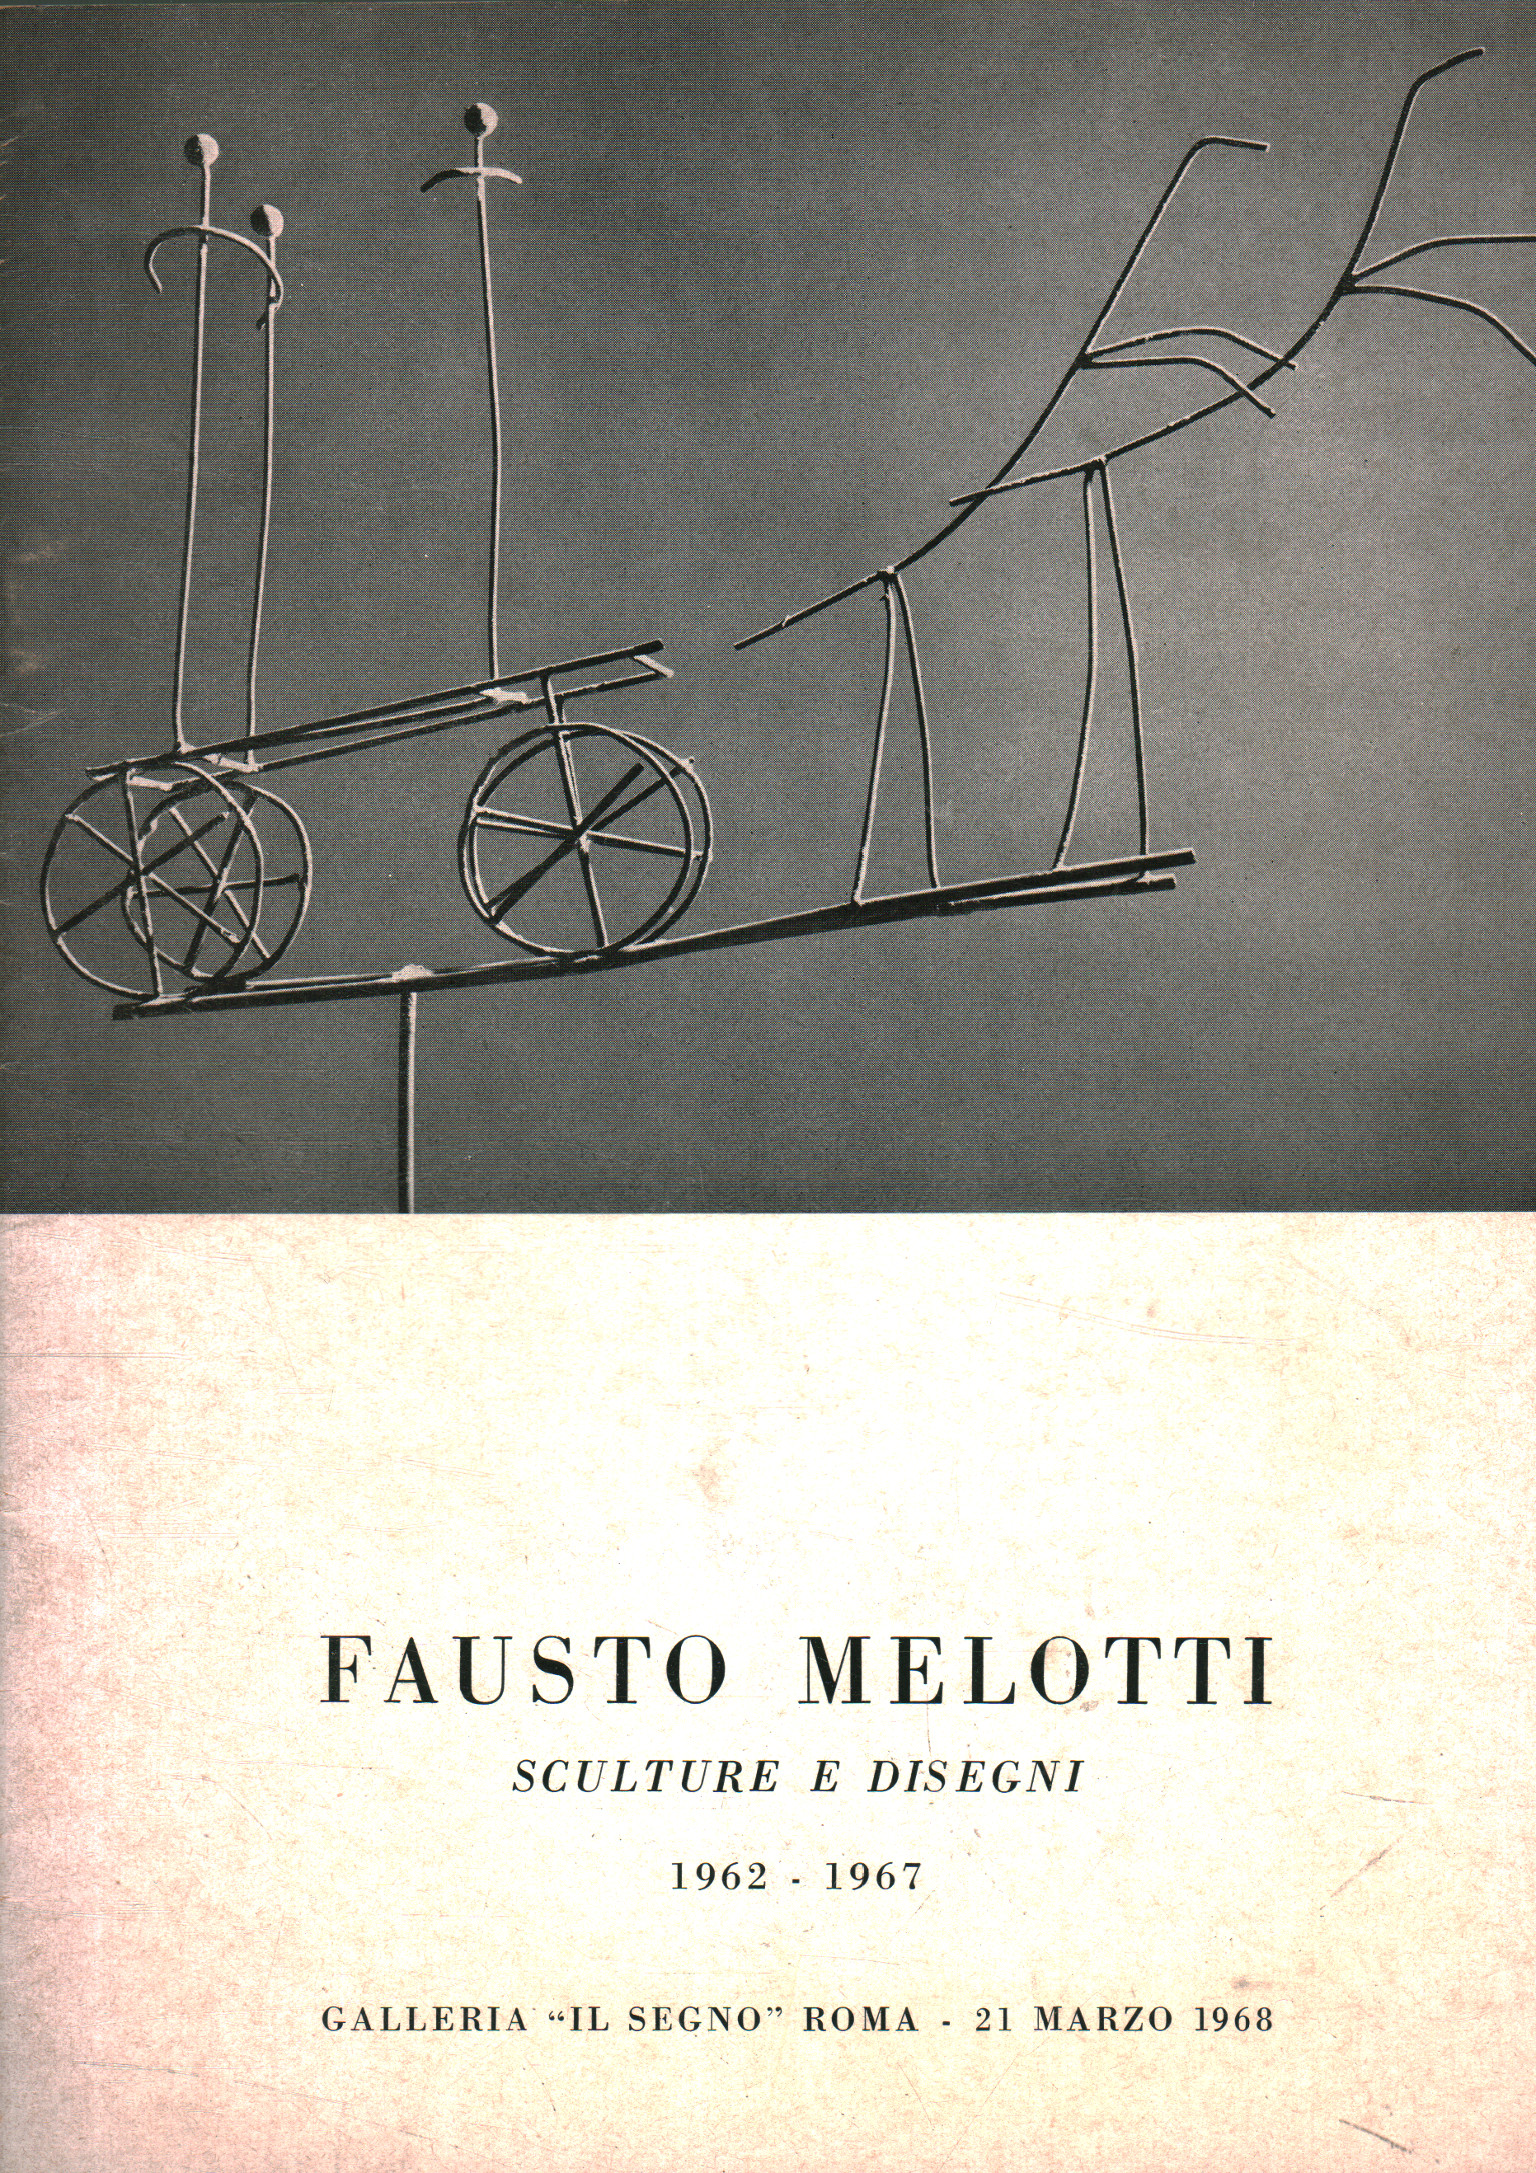 Fausto Melotti. Sculptures and drawings 1962-